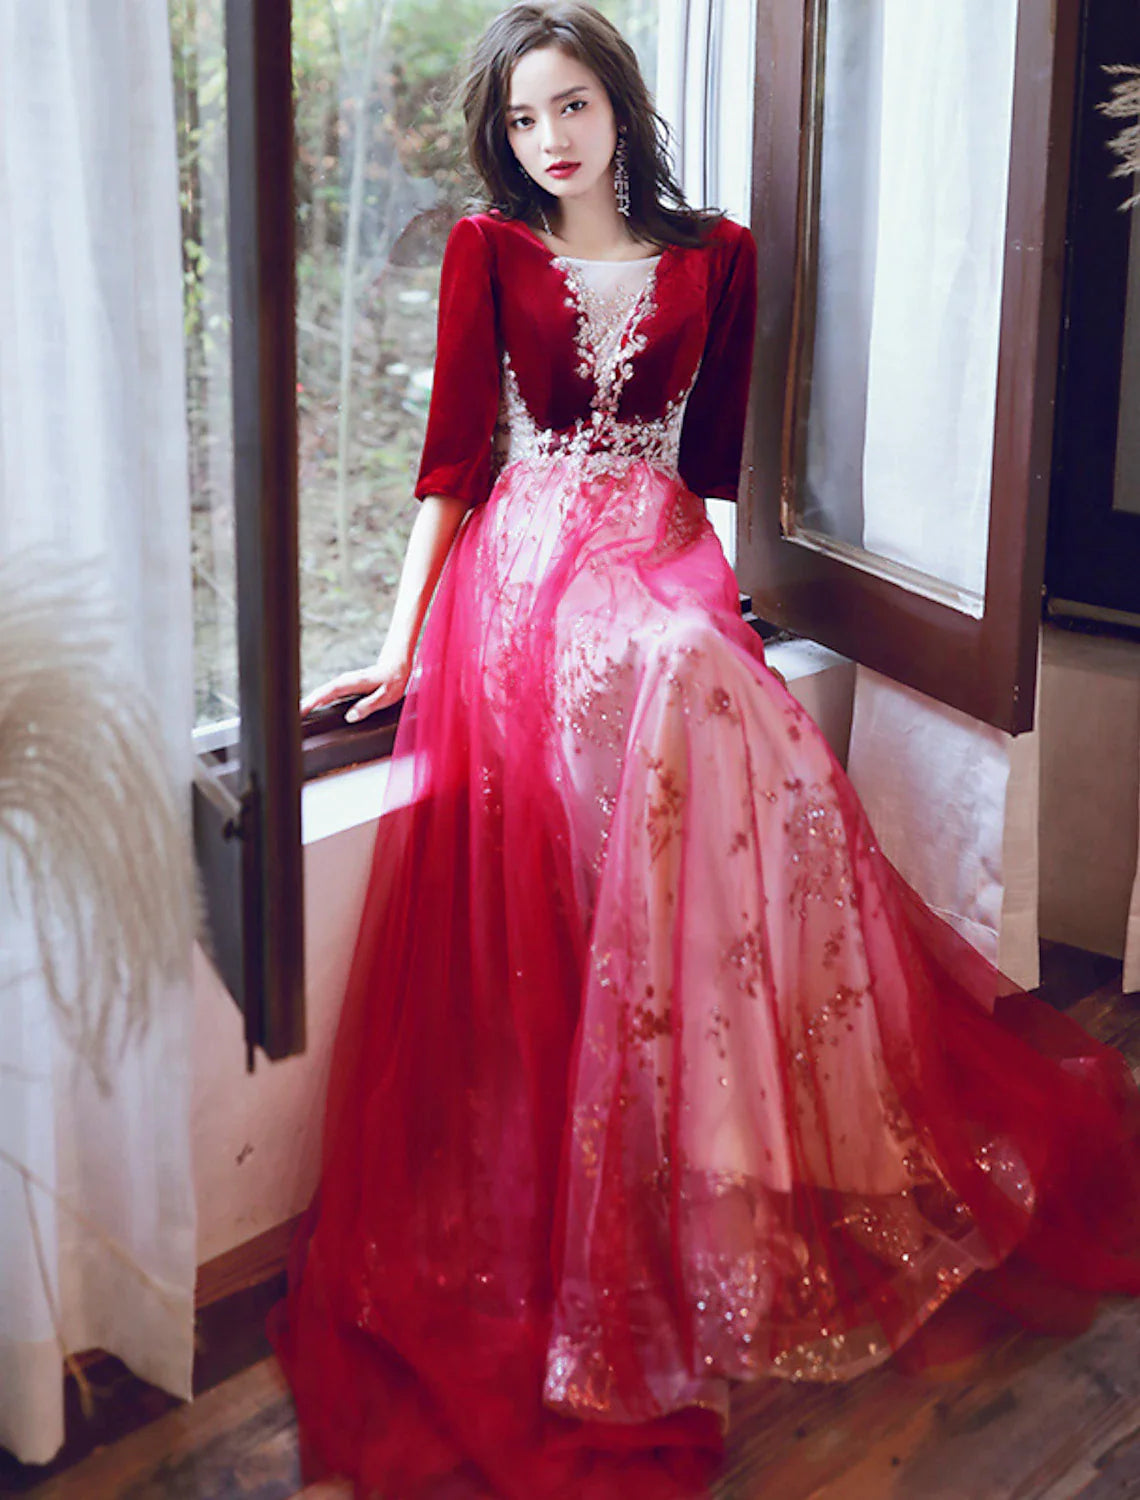 A-Line Glittering Cut Out Party Wear Formal Evening Dress Illusion Neck Half Sleeve Floor Length Velvet with Sequin Appliques